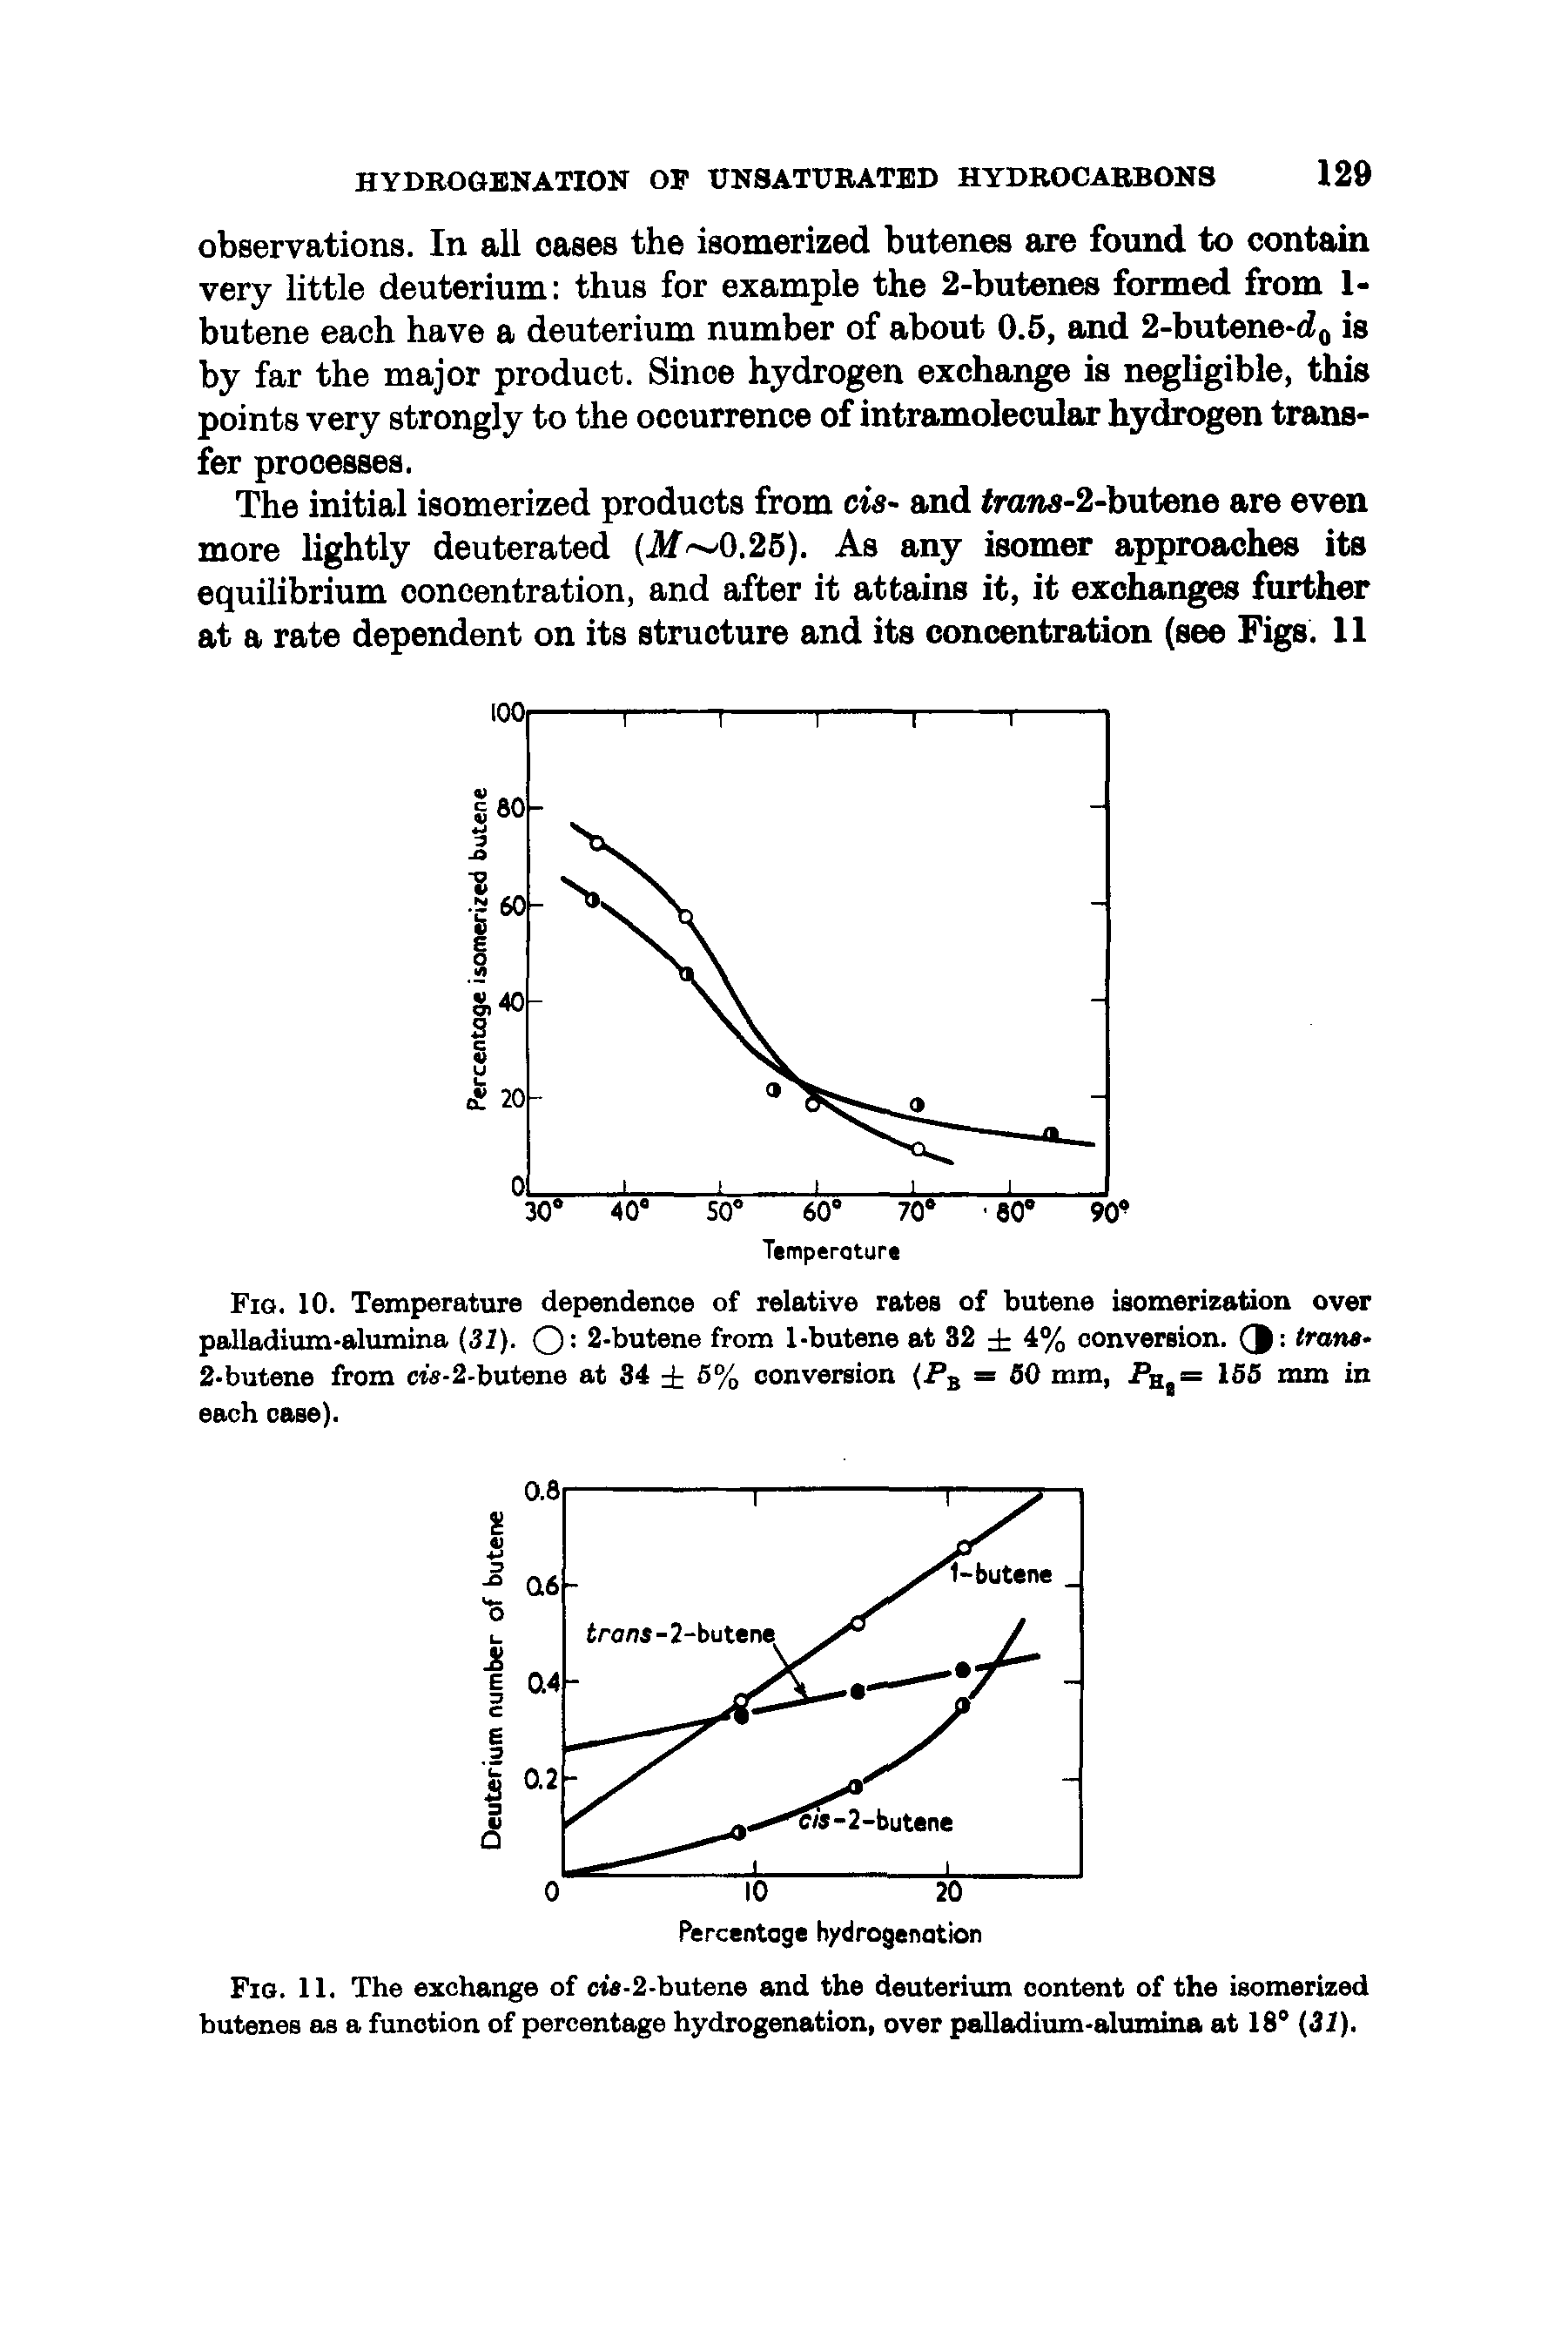 Fig. 11. The exchange of cts-2-butene and the deuterium content of the isomerized butenes as a function of percentage hydrogenation, over palladium-alumina at 18° (31).